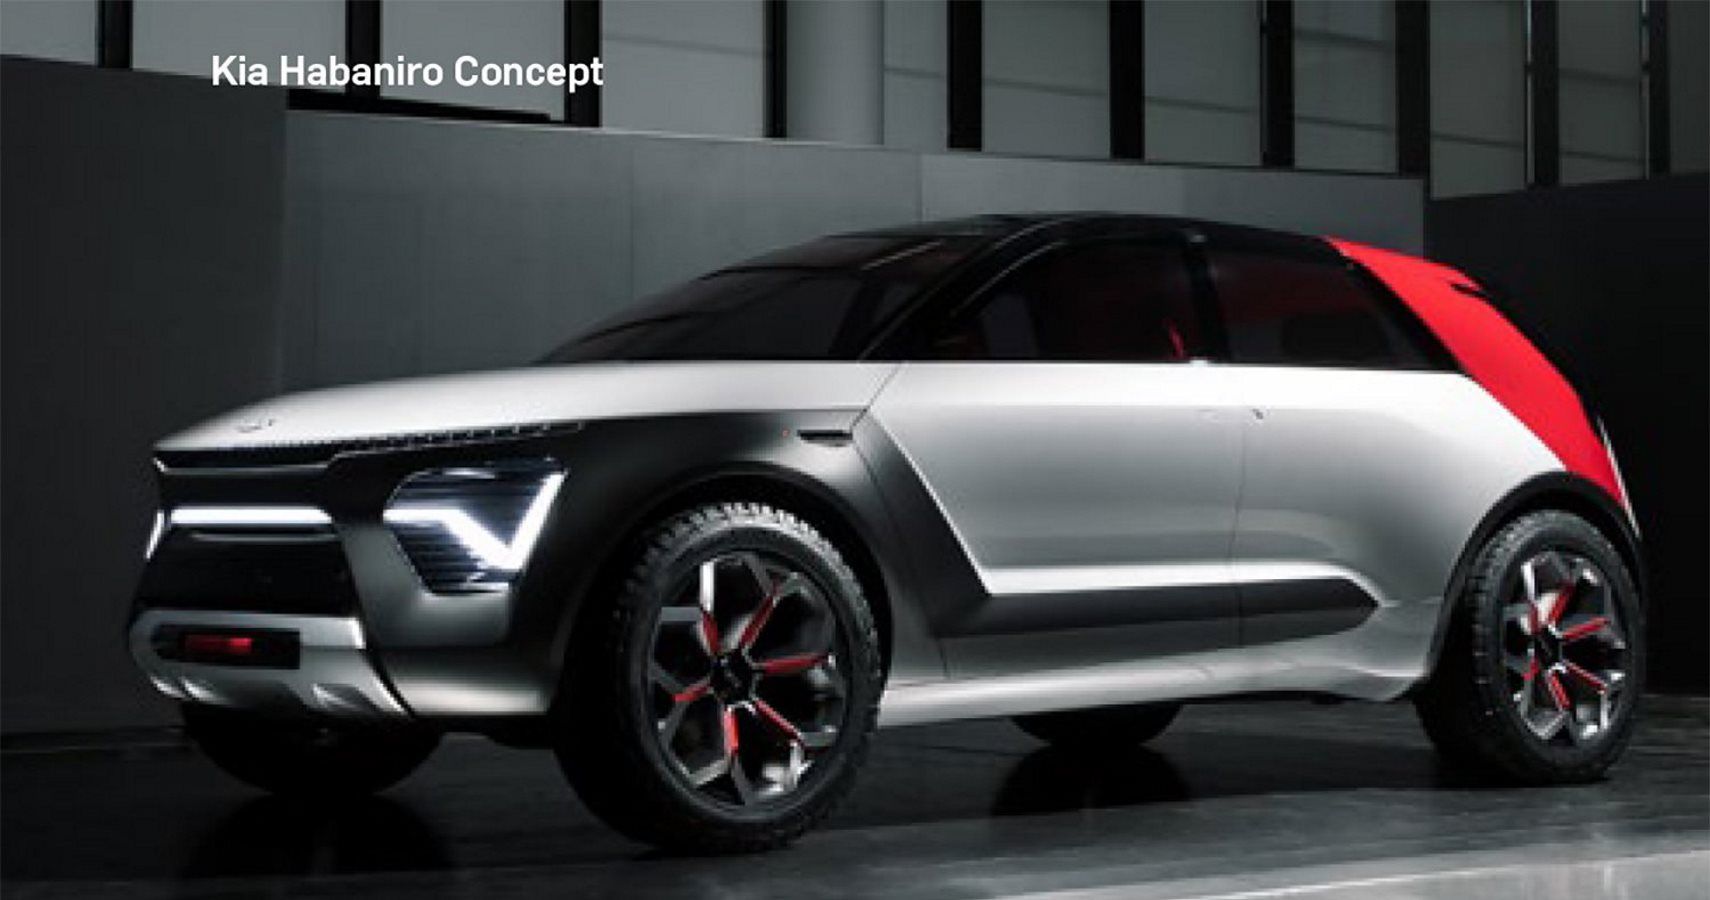 Kia Habaniro Concept Leaks And It's One Spicy Crossover